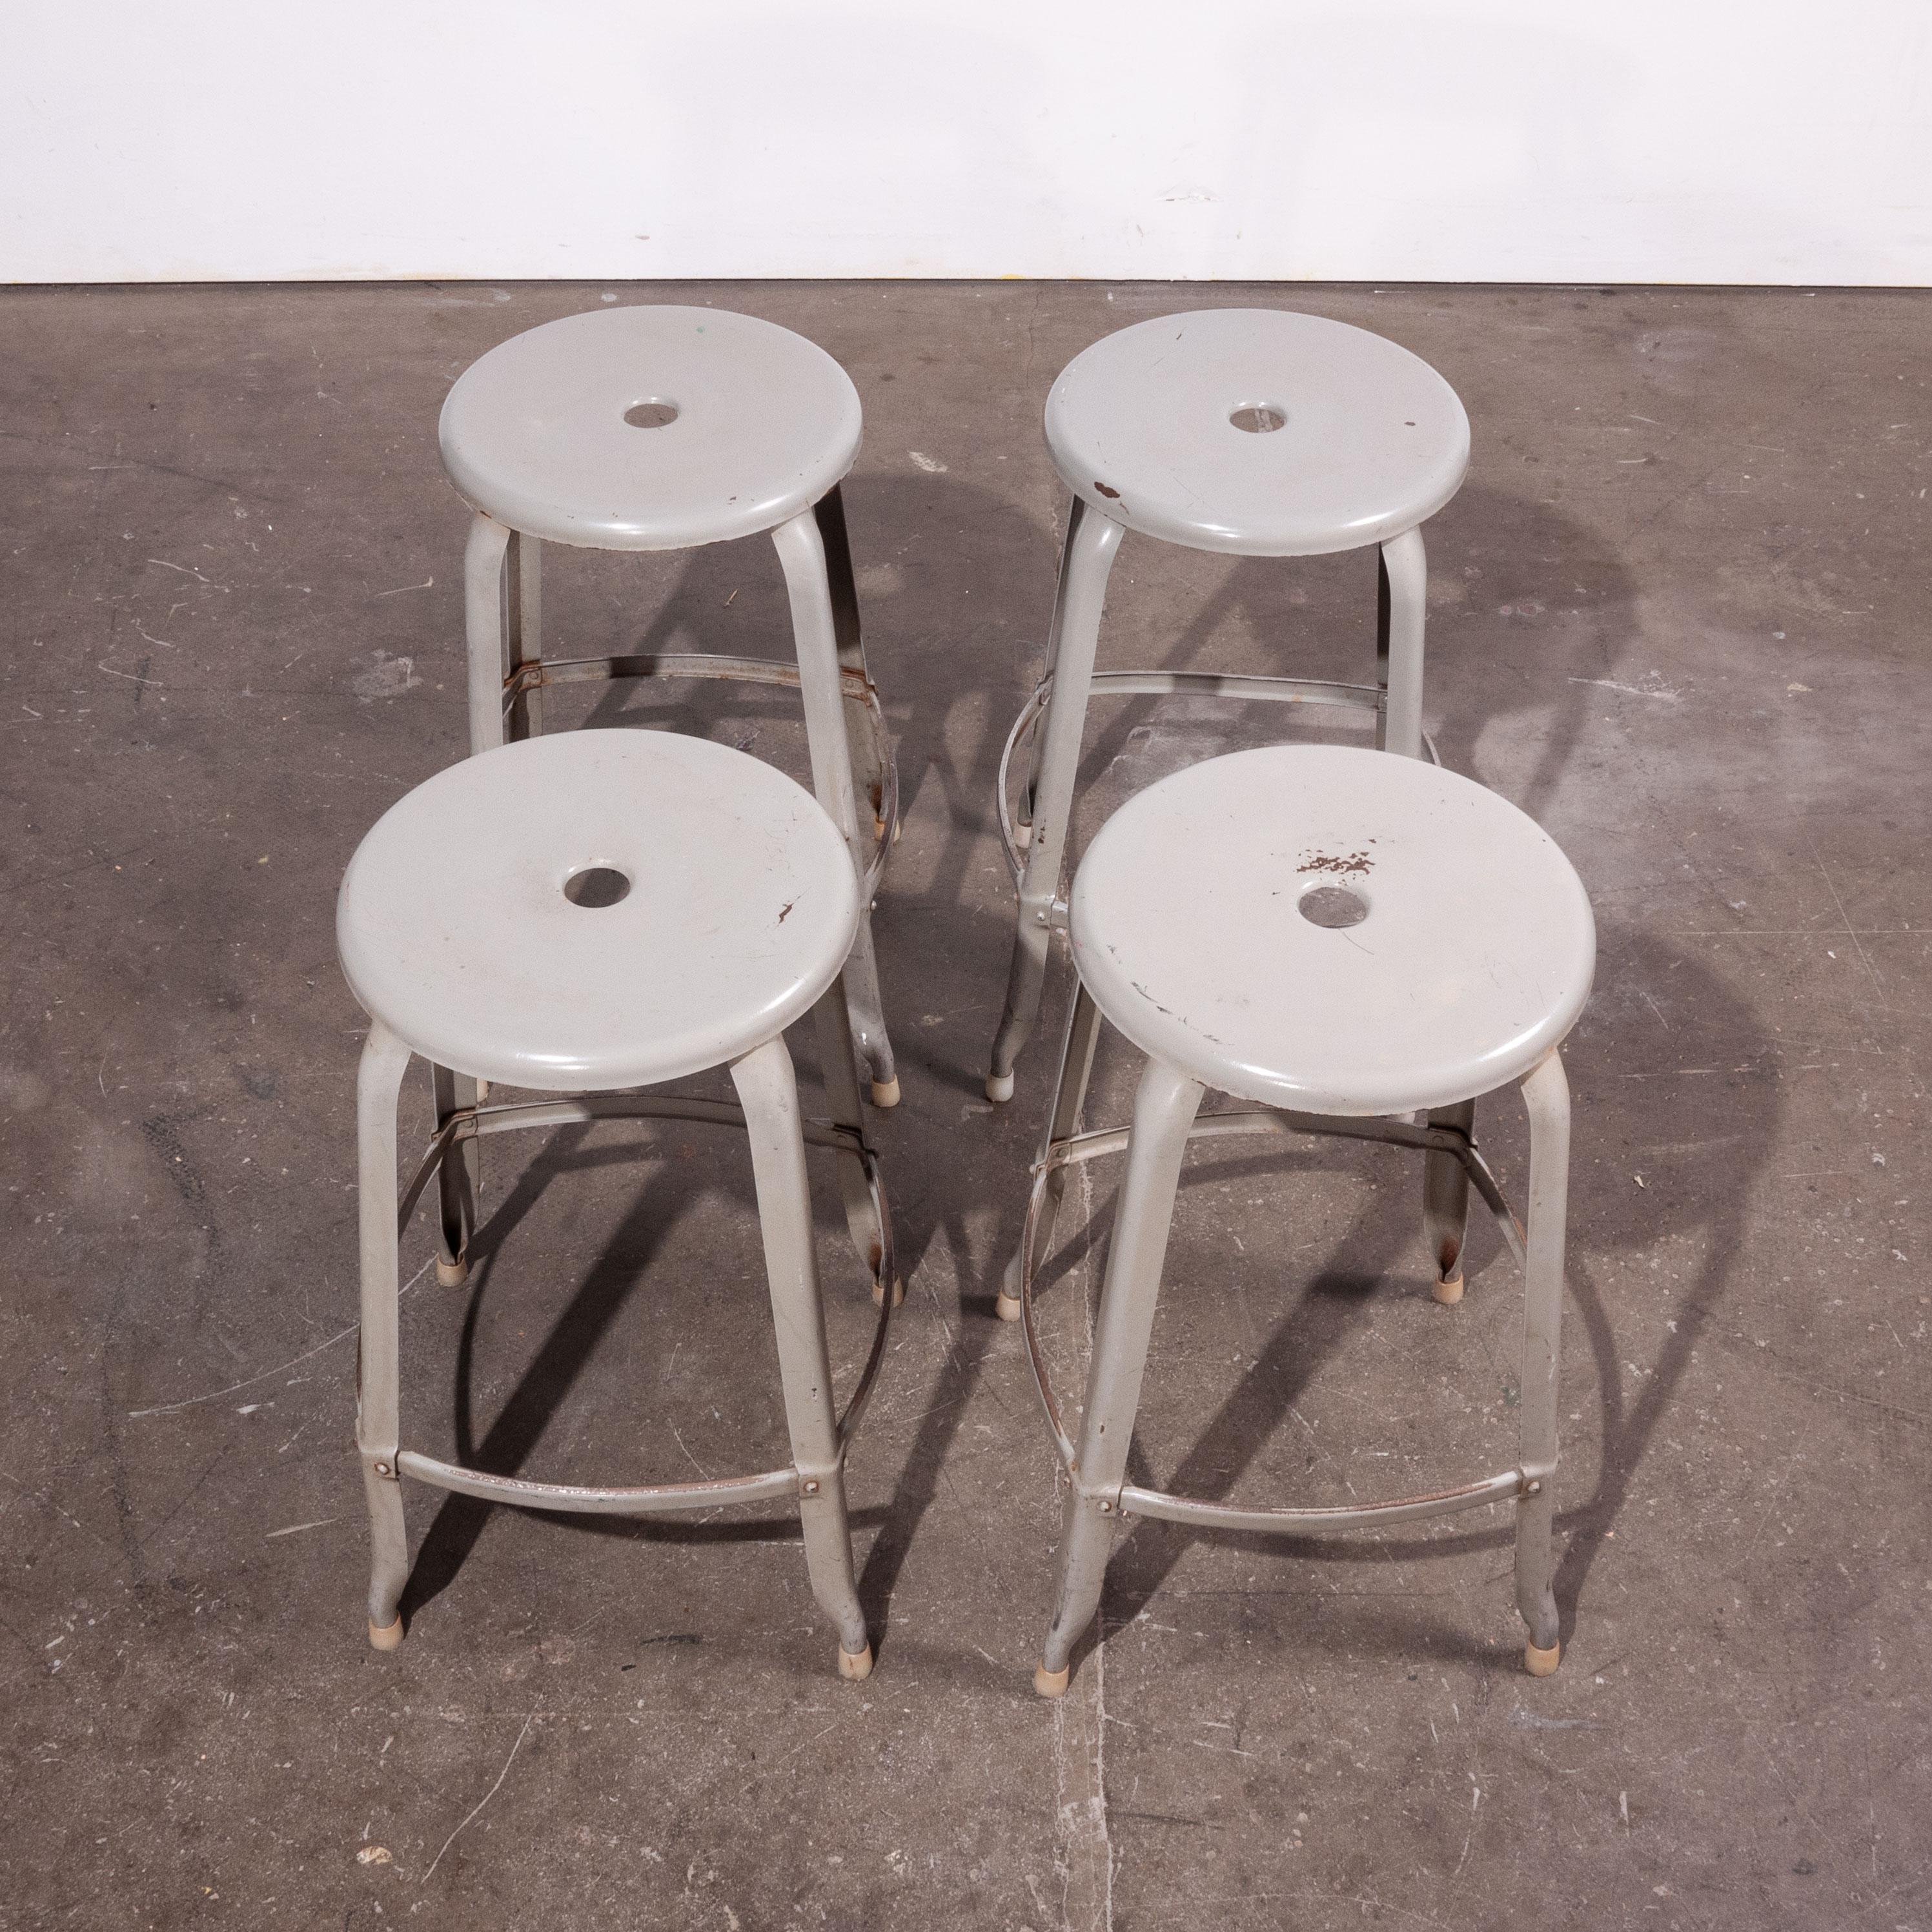 1950s vintage original industrial Nicholle stacking stools, set of four. One of our all time favourite products, exceptional in design with the minimal use of materials yet strong, well proportioned and so beautiful. Sourced from a laboratory in